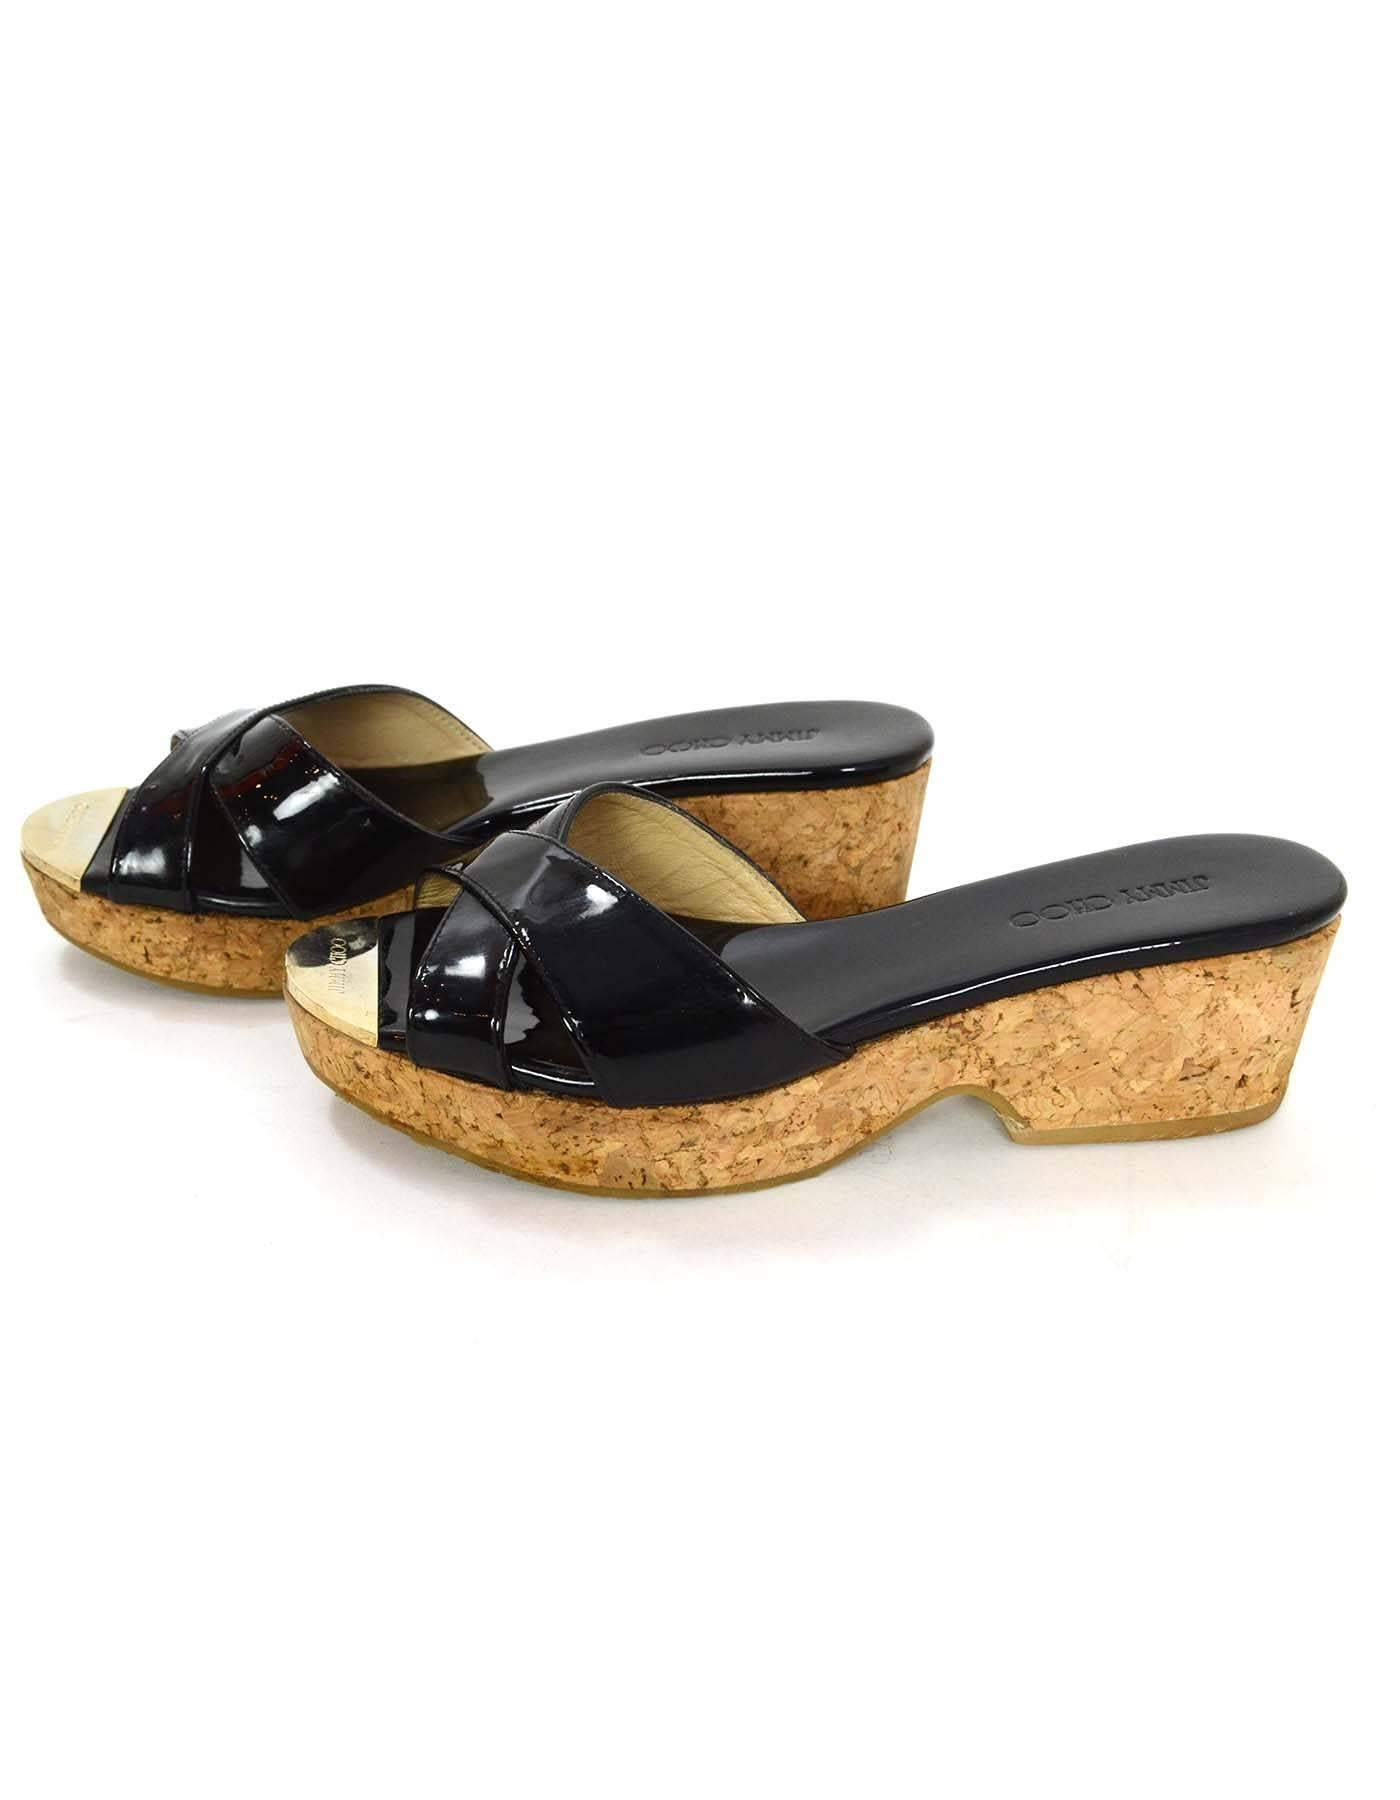 Jimmy Choo Black Patent & Cork Platform Mules 
Features goldtone cap at insole with Jimmy Choo engraved in it
Made In: Spain
Color: Black and tan
Materials: Patent leather, cork and metal
Closure/Opening: Slide on
Sole Stamp: Jimmy Choo Made